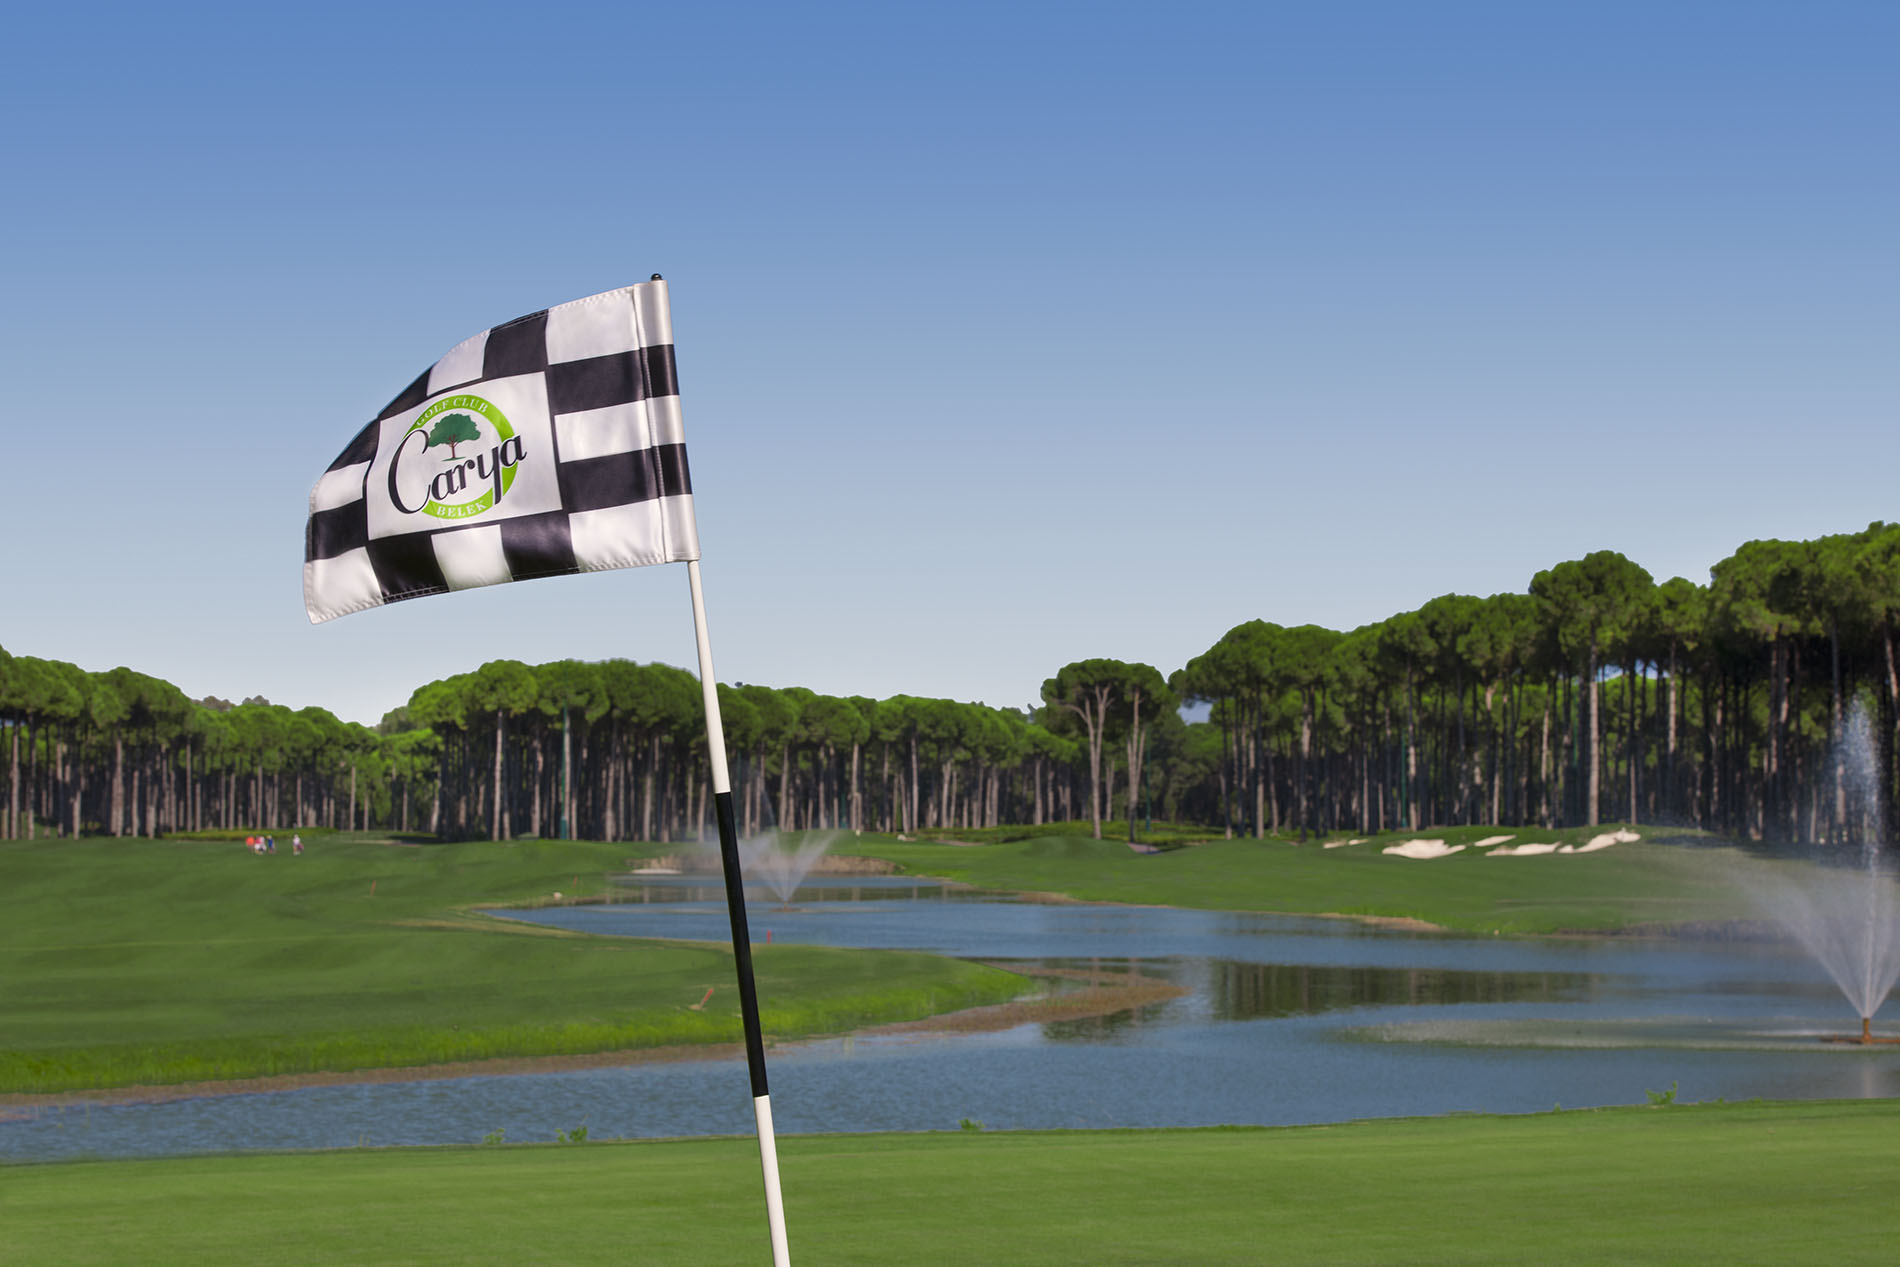 Course Updates for Overseeding & Turkish Airlines Open